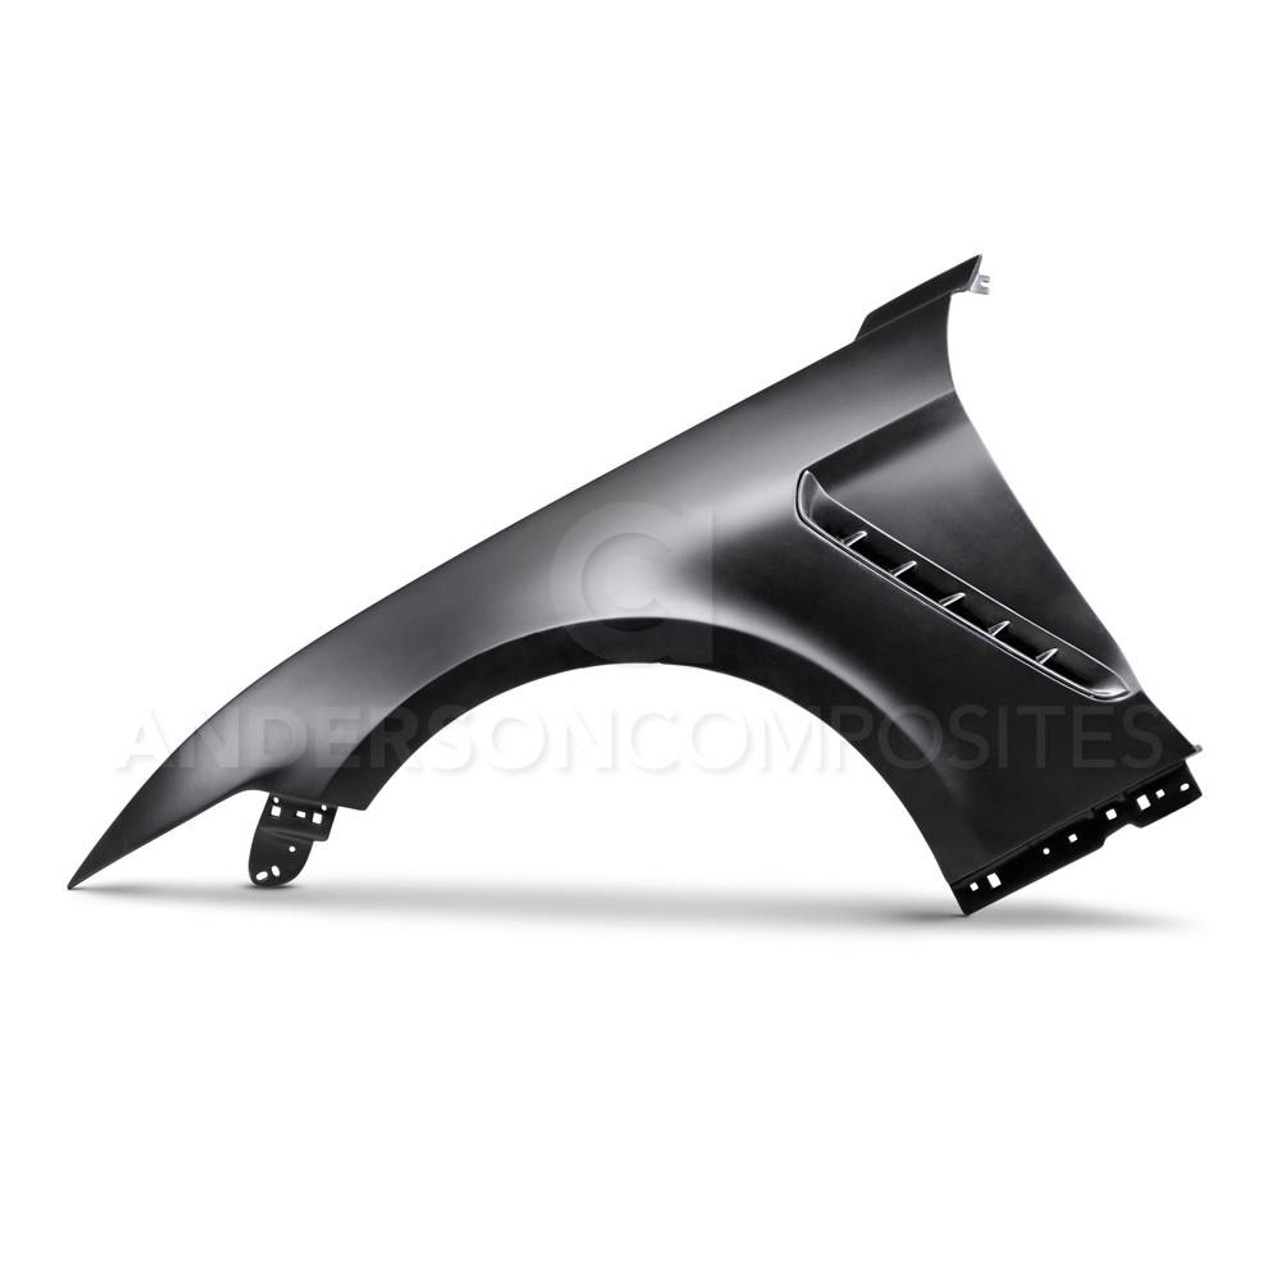 Anderson Composites 2015 - 2017 Mustang GT350 Style Fiberglass Front Fenders (Pair)